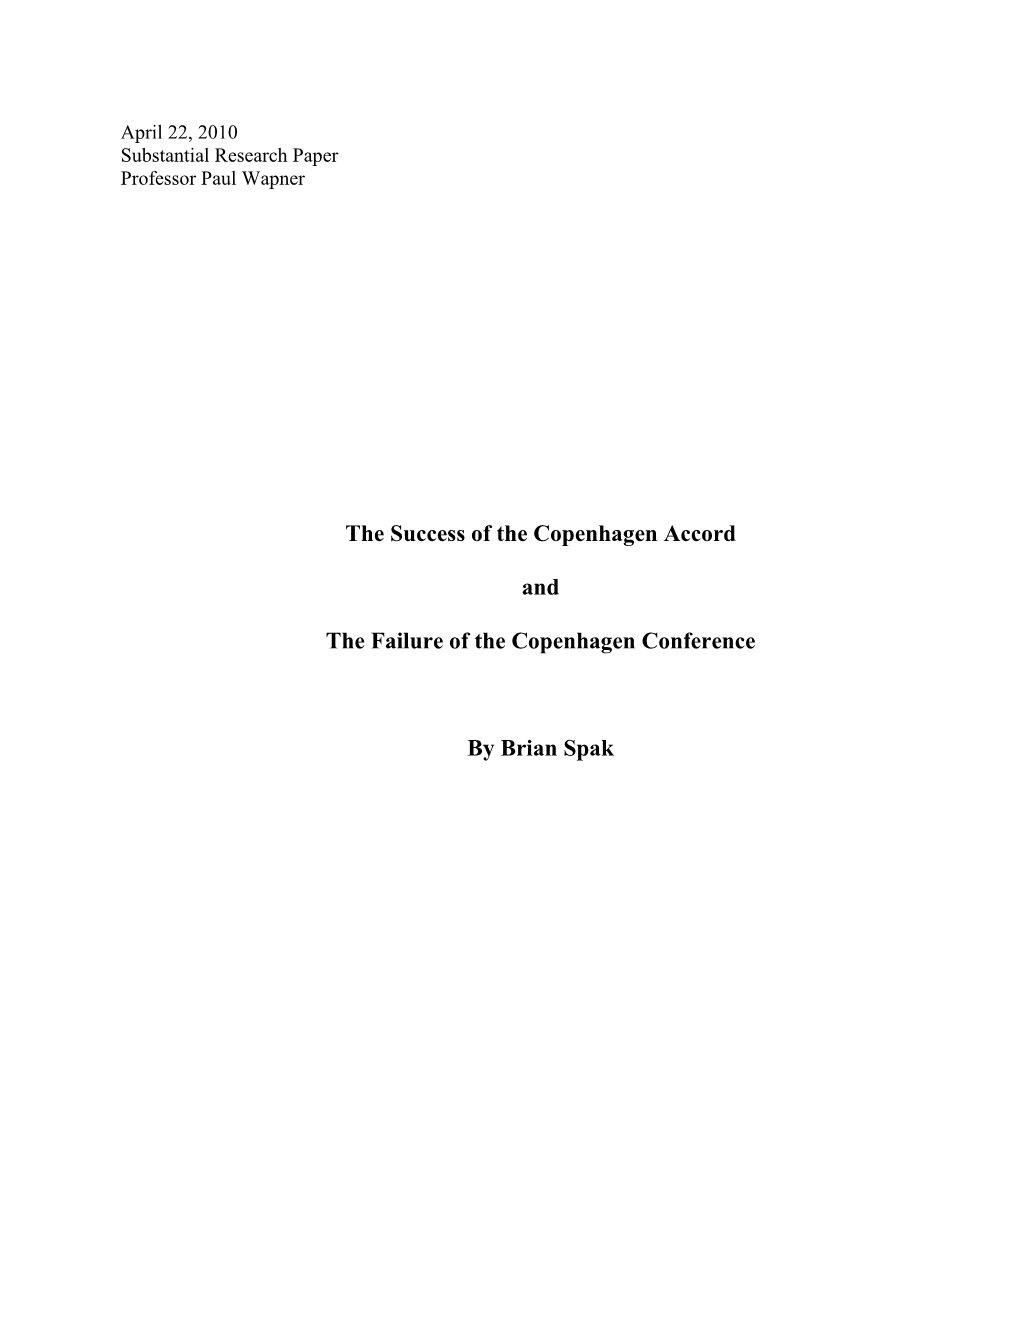 The Success of the Copenhagen Accord and the Failure of The